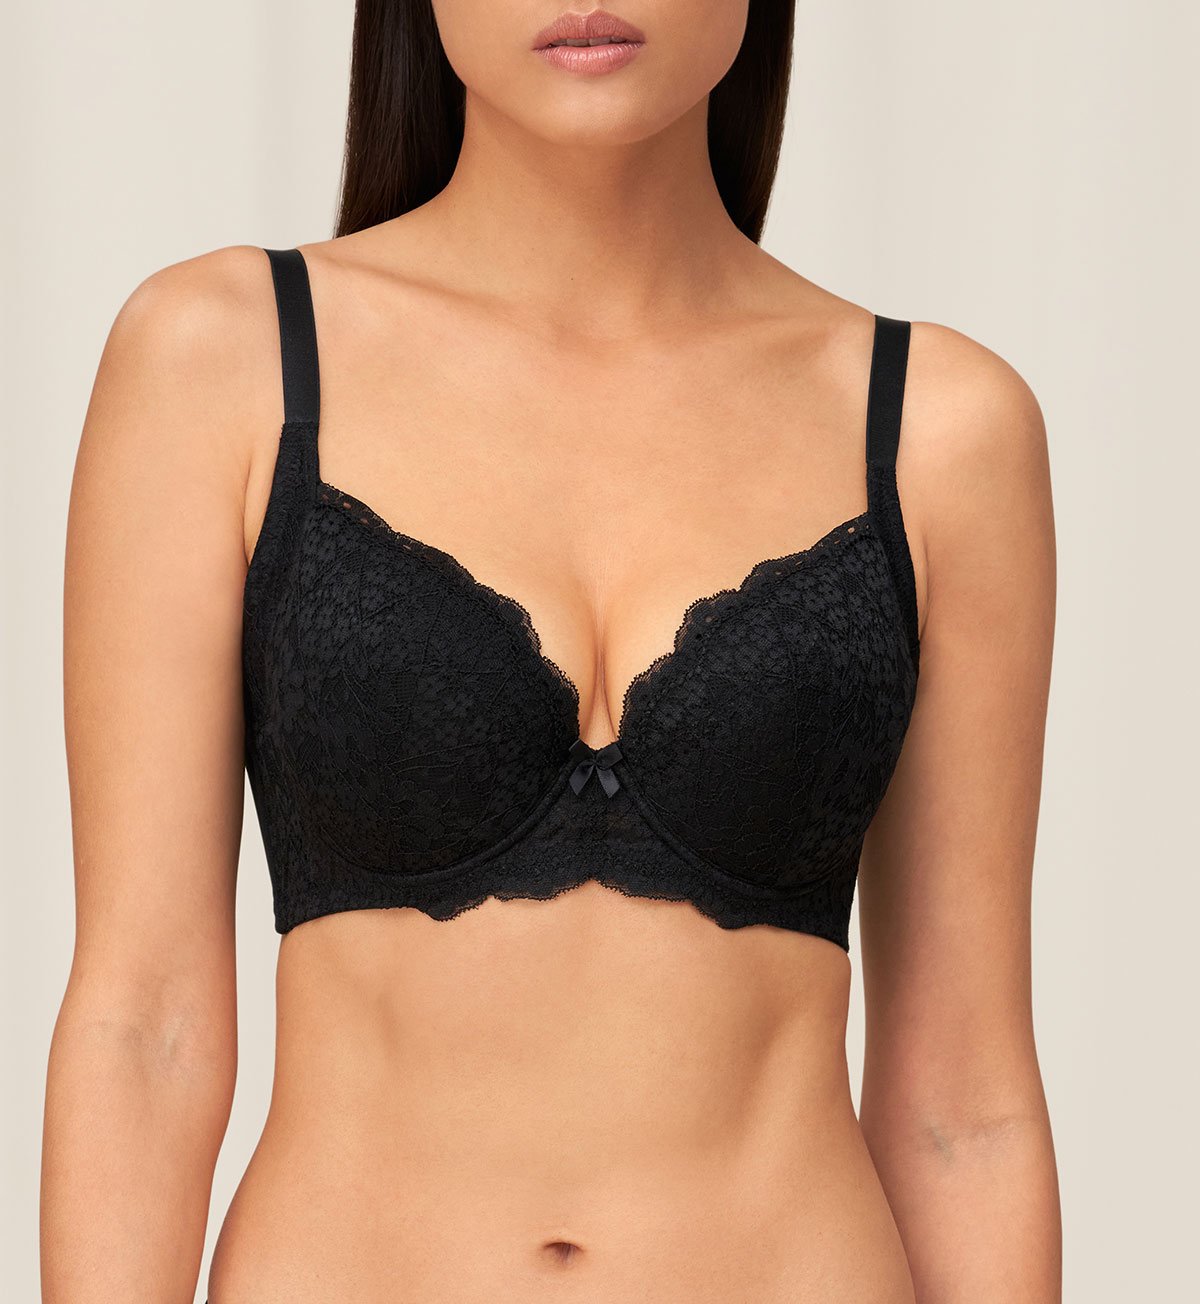 Shape/Support Bras, Sculpt Support, Simply Sculpt Blossom Wired Support  Bra